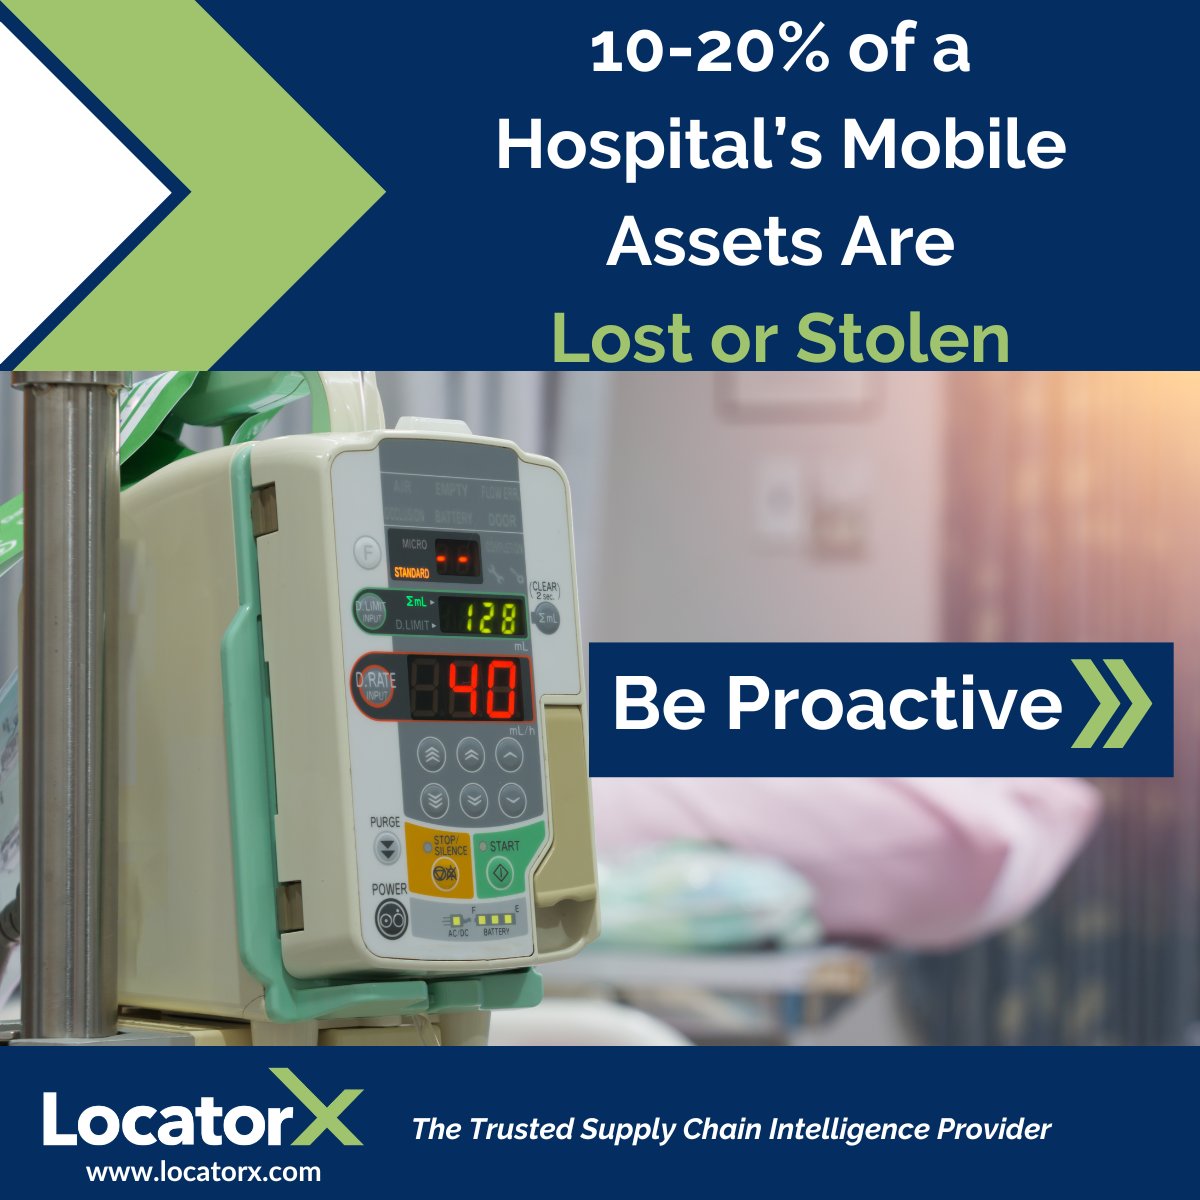 10 – 20% of a hospital’s mobile assets (approx. $3,000 per item) are lost or stolen during their useful life according to AMR research.

Be proactive. Gain real-time visibility. Know where your devices are at all times.
> bit.ly/4dgE0uD

#MedTechIoT #AssetVisibility